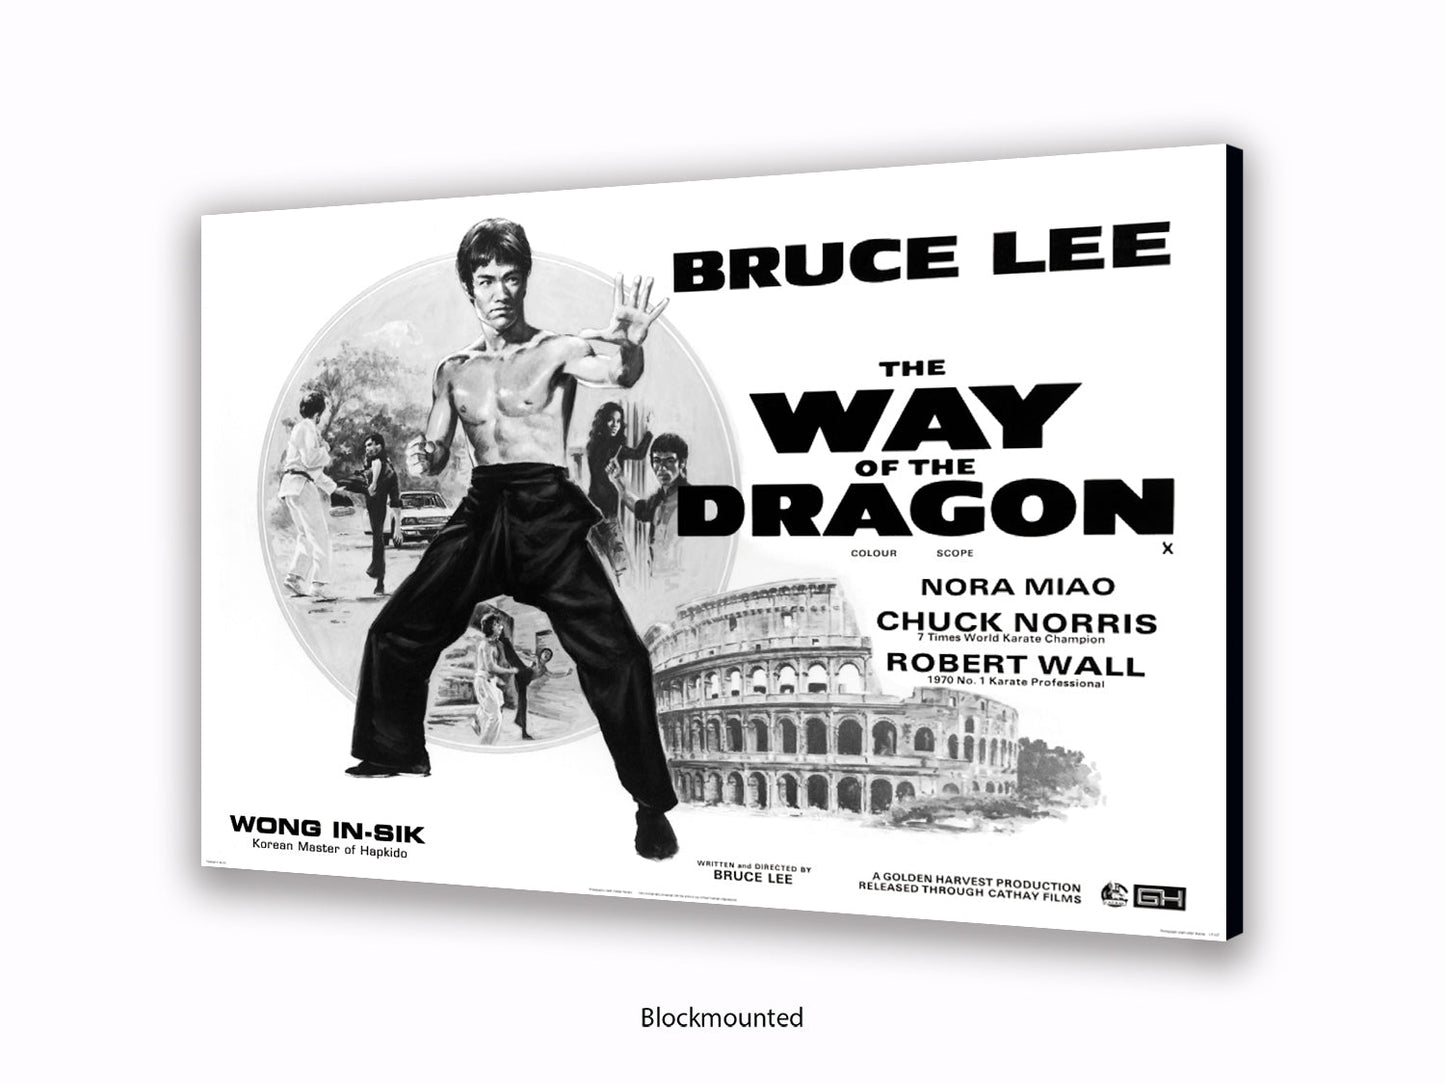 Bruce Lee Way Of The Dragon Poster